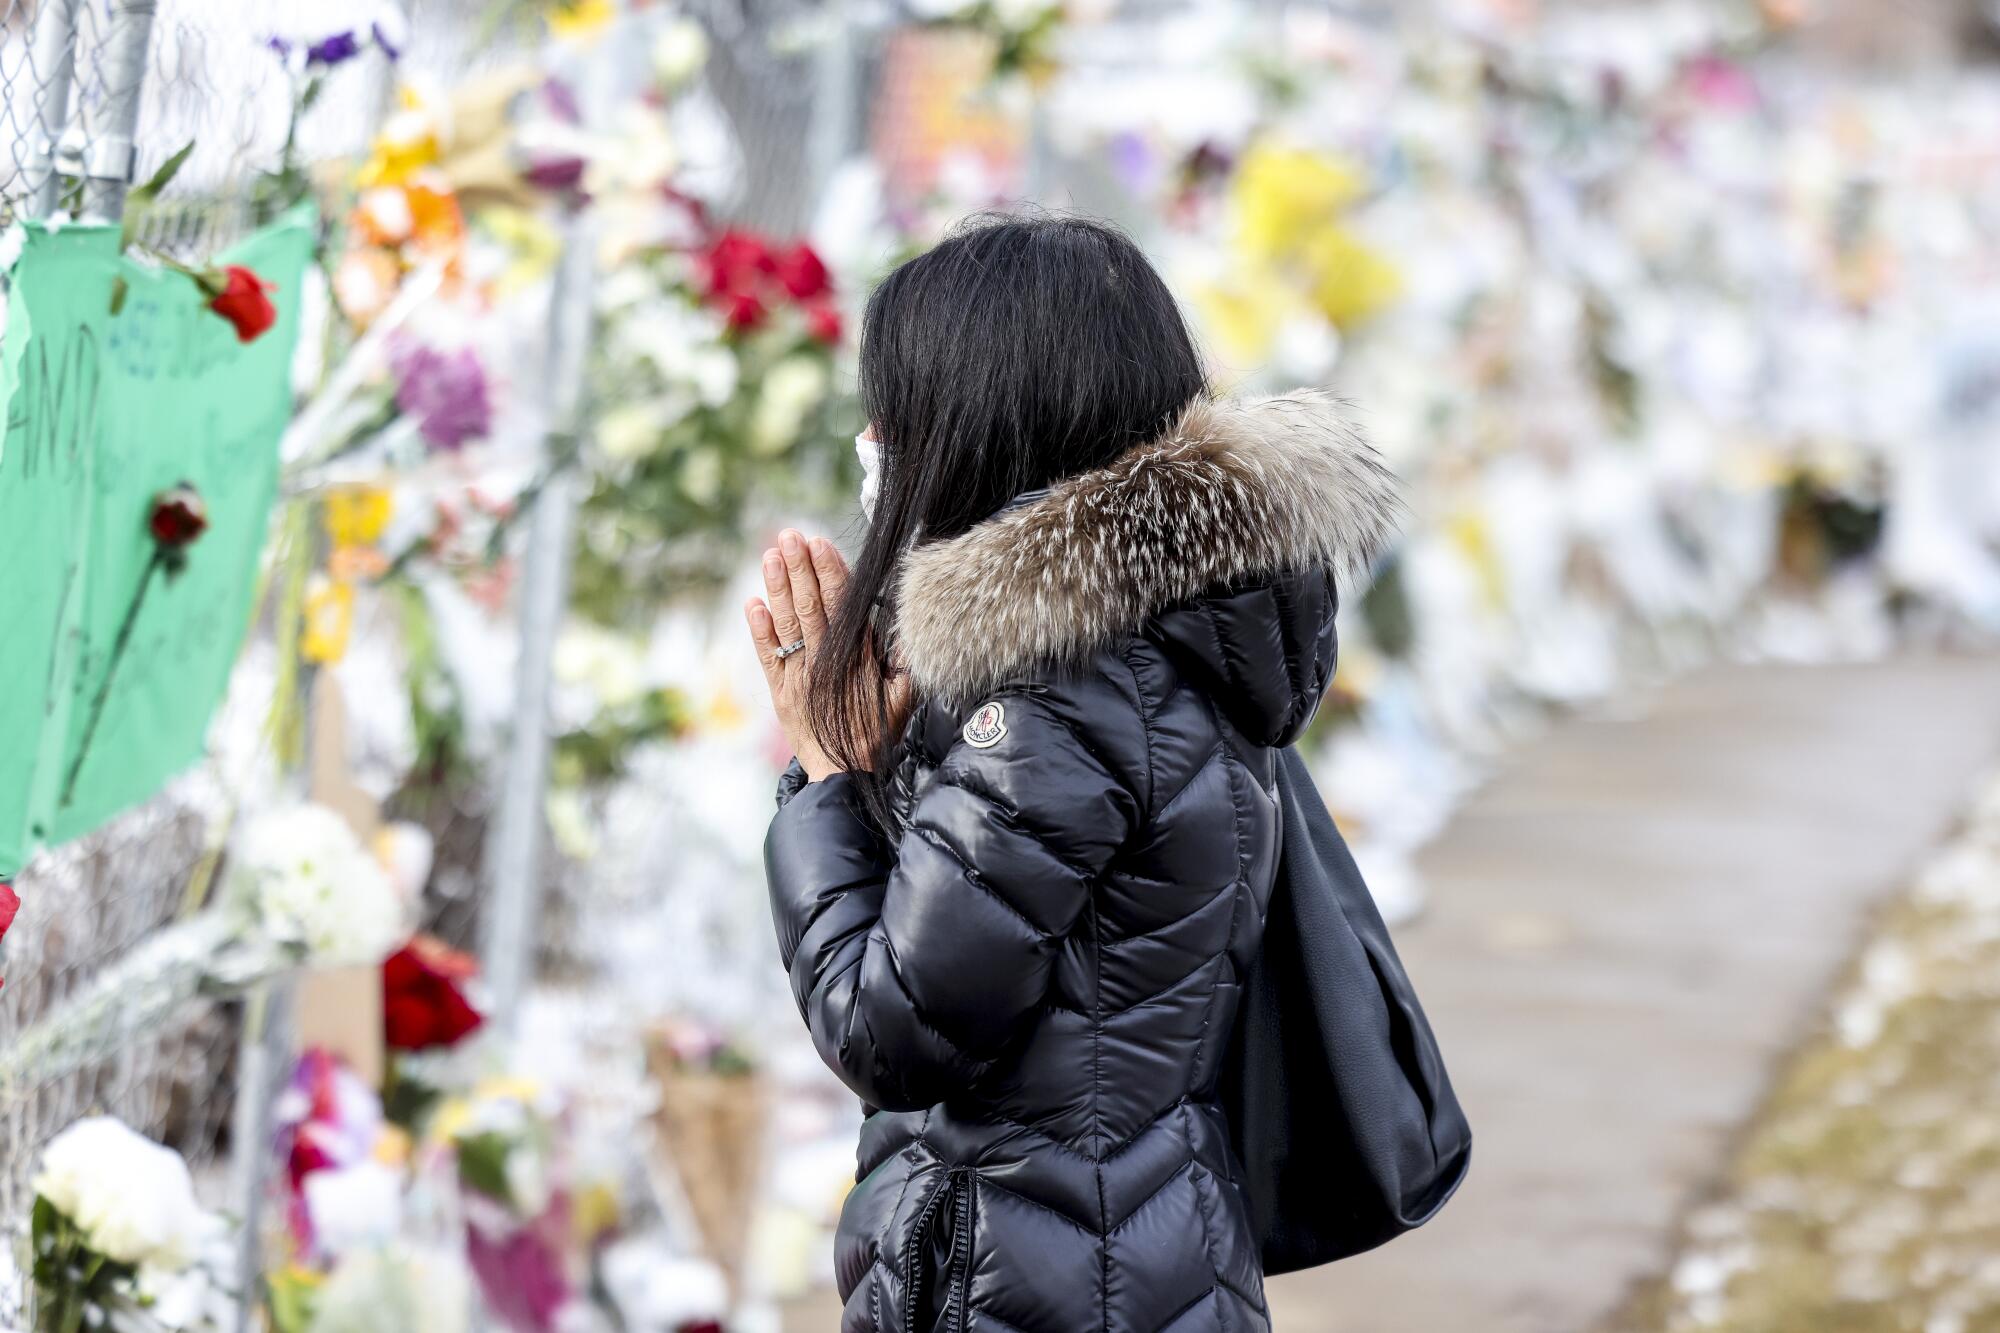 A woman stands with her hands clasped in front of a display of flowers on a sidewalk